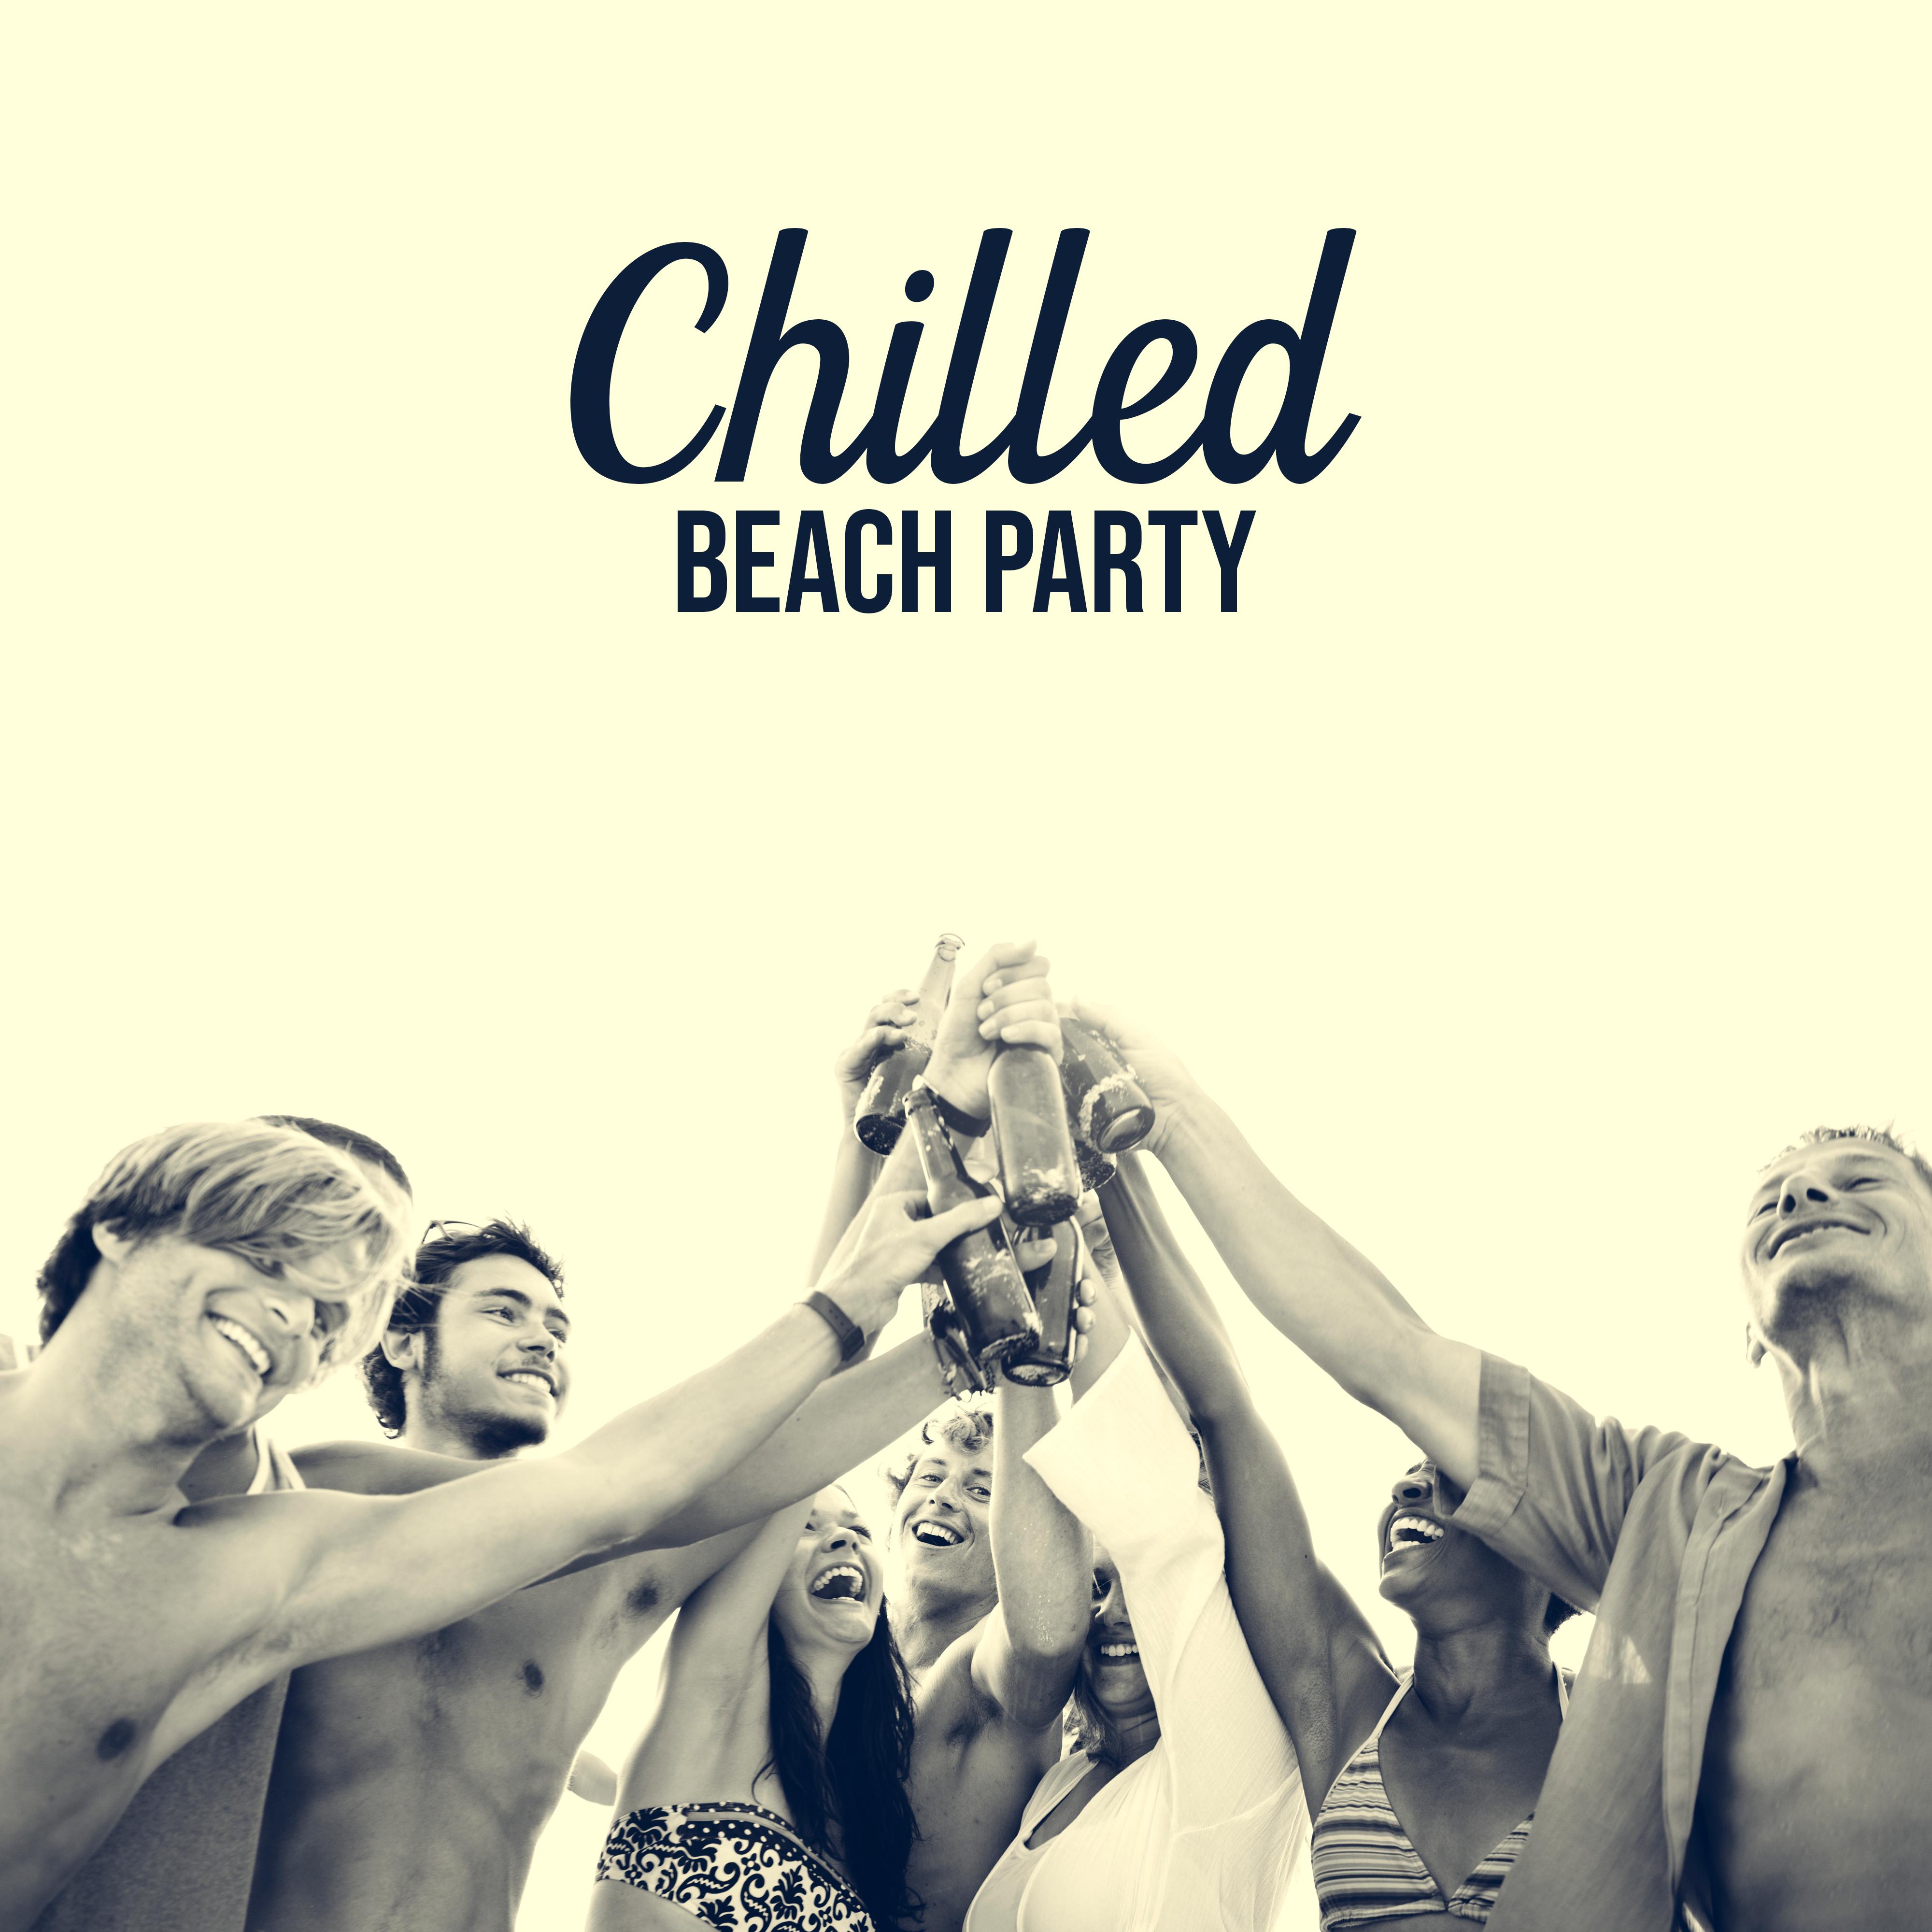 Chilled Beach Party - Sunset Beach Vibes, Ibiza Dance Party, Ibiza Lounge Chill, Music Zone, Beach Chill, Tropical Pure Chillout